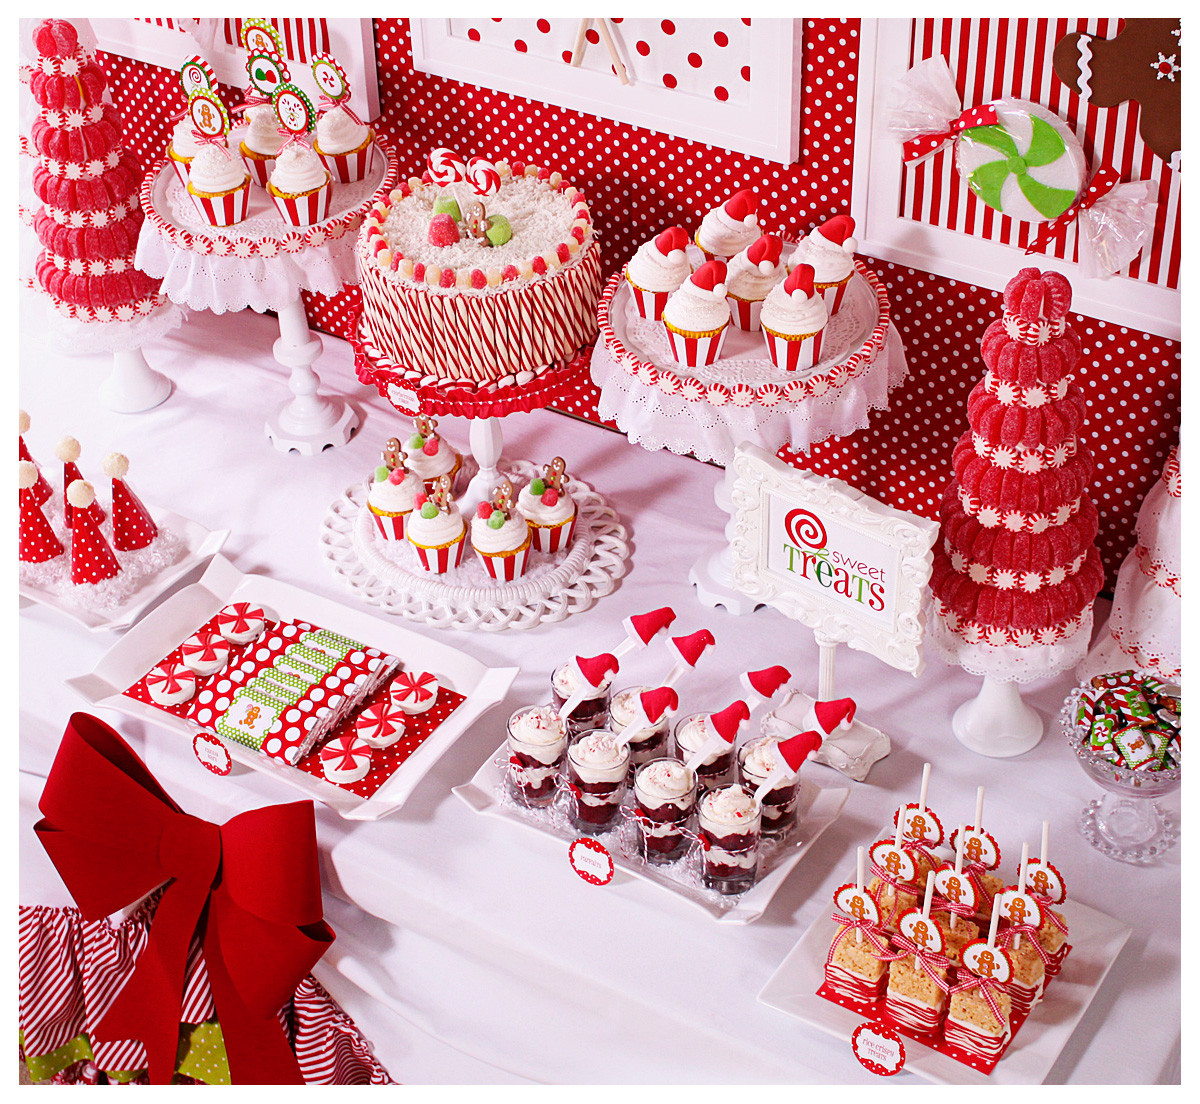 White Christmas Candy
 Amanda s Parties To Go Candy Christmas Dessert Table